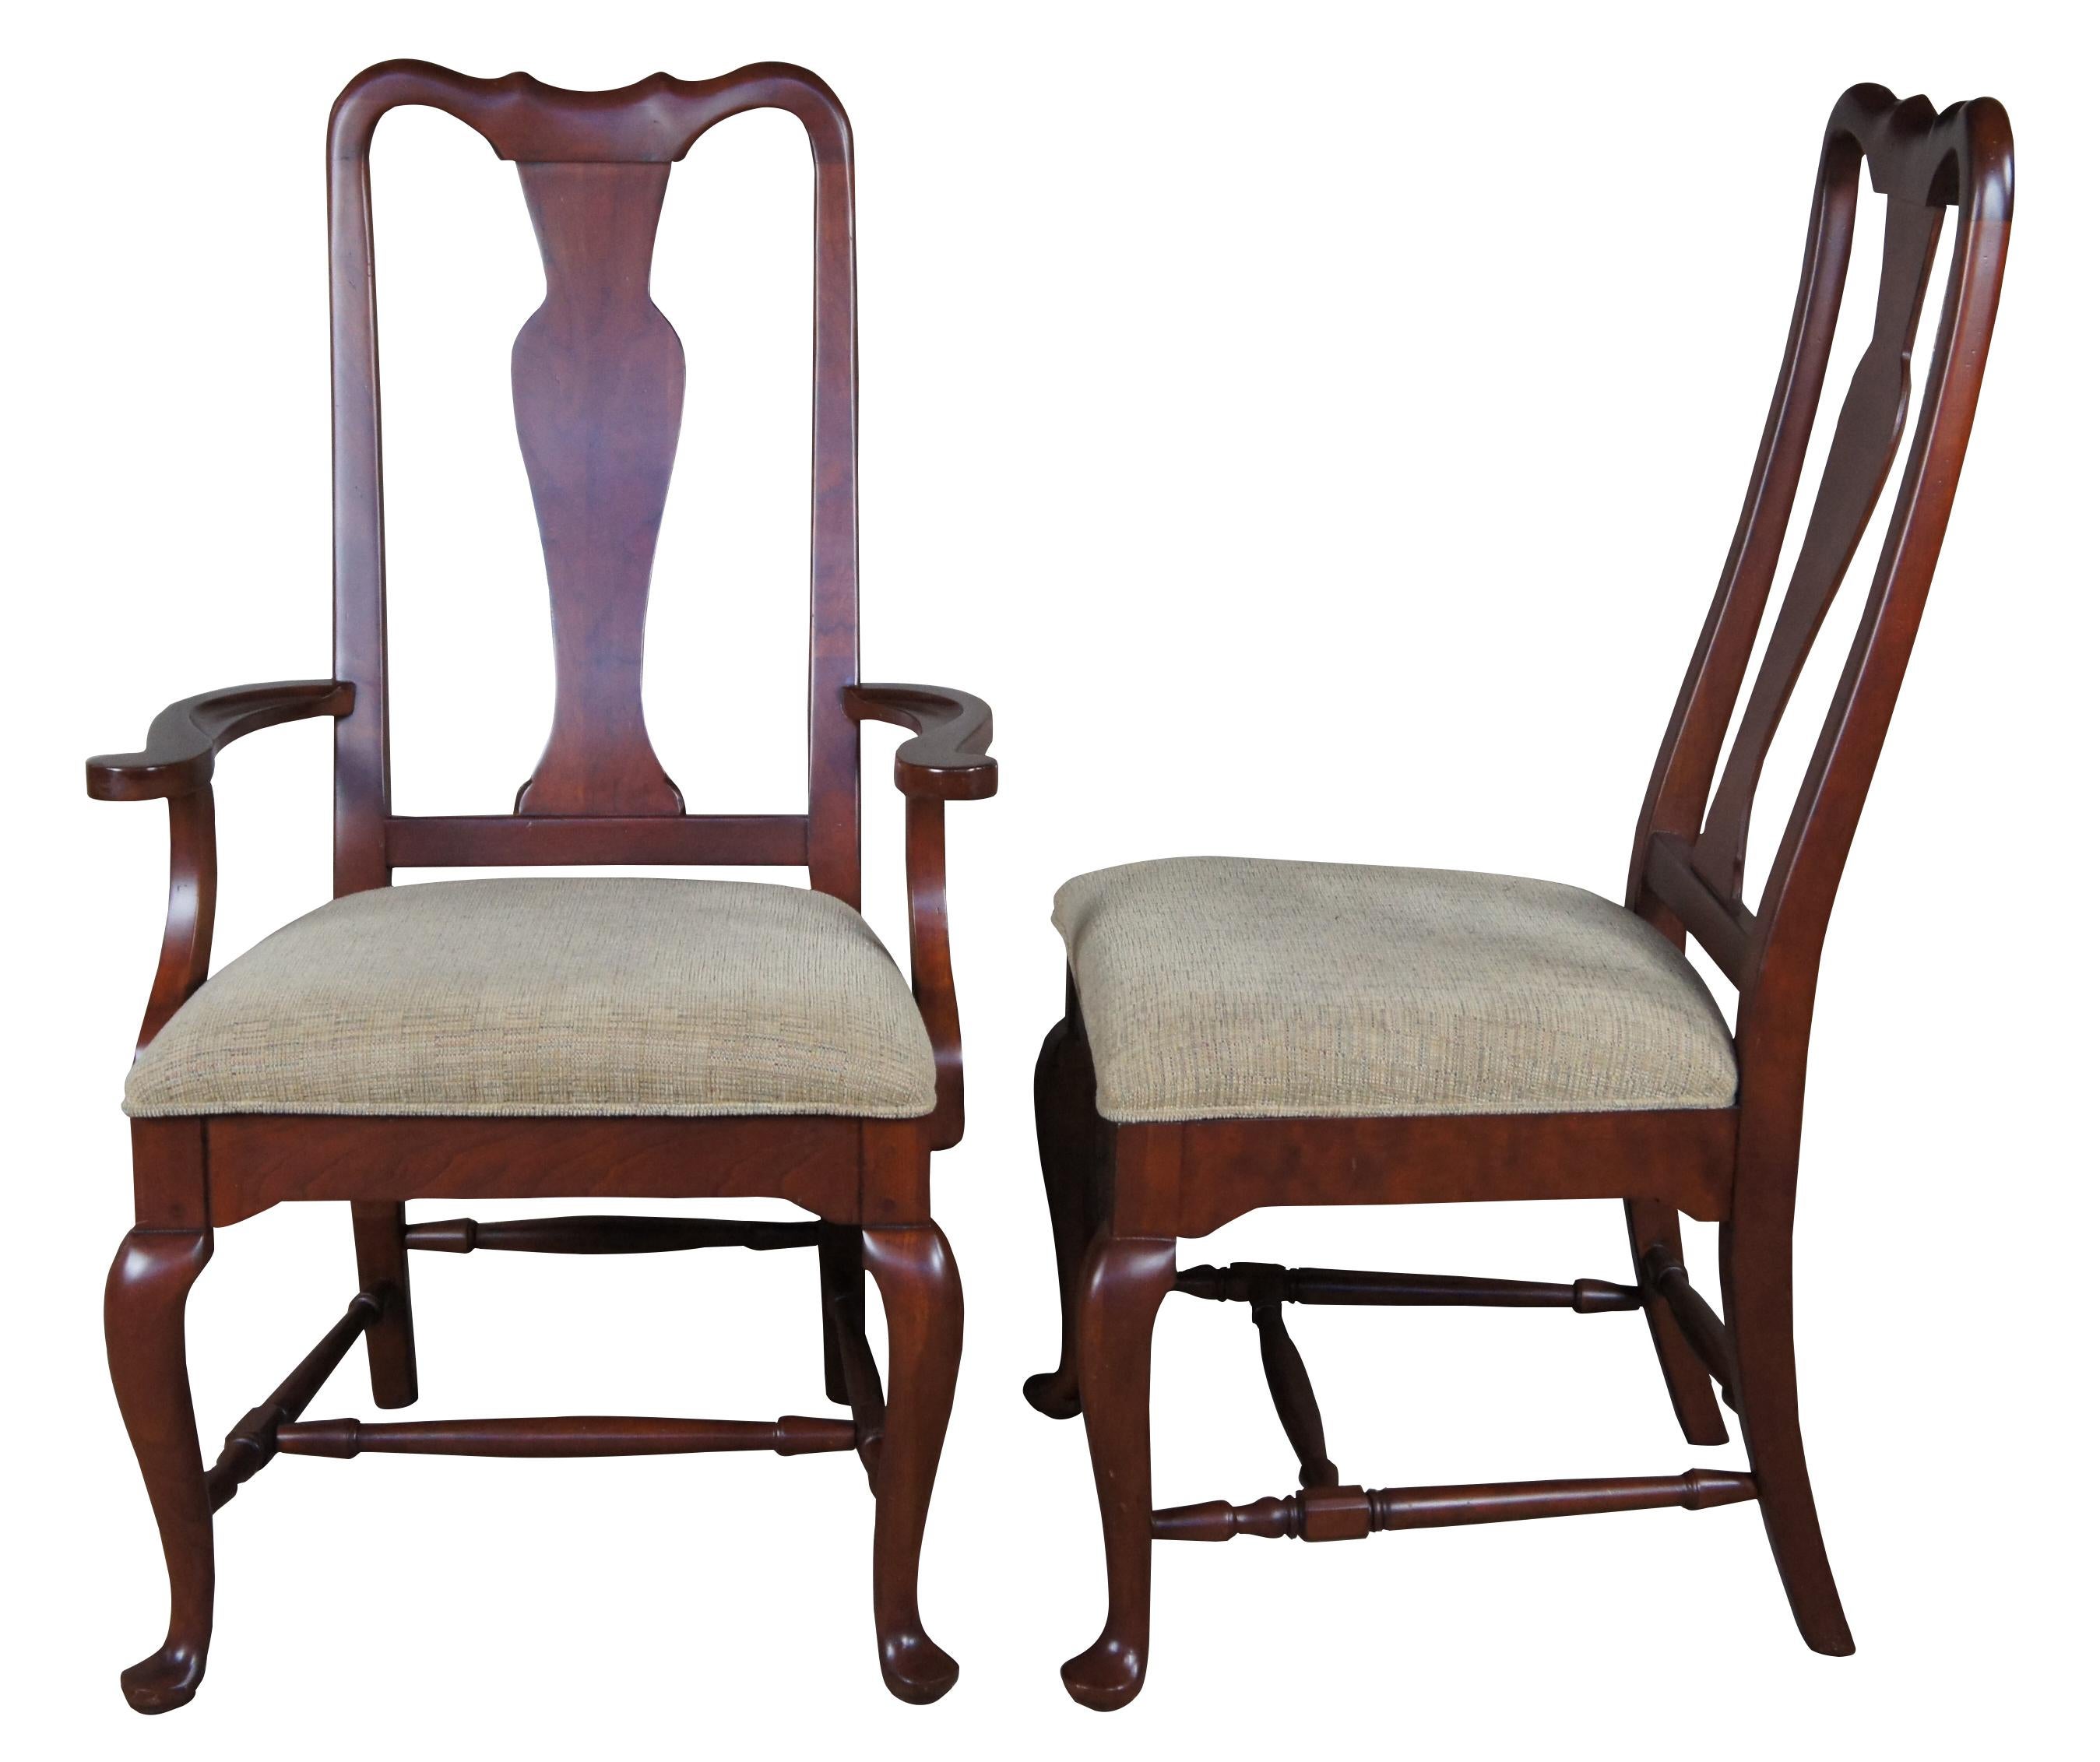 An elegant set of solid cherry dining room chairs by Bob Timberlake for Lexington, circa 1980s. Classic Queen Anne styling with a grooved crest over vase shaped splats. The chairs are supported by cabriole legs with pad feet that are connected by